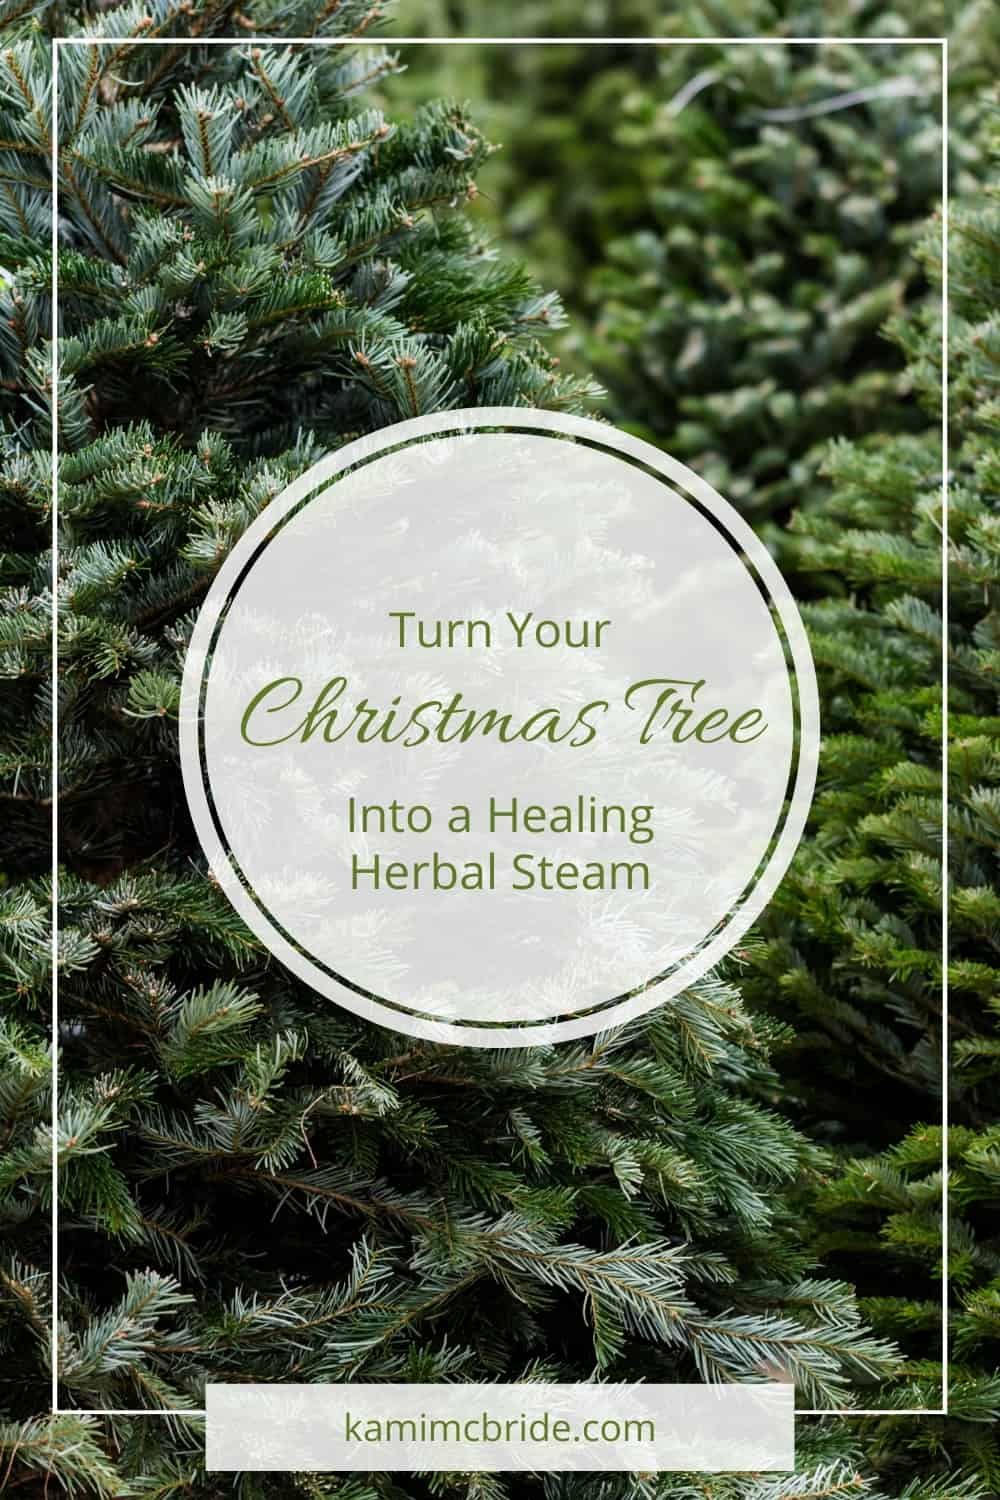 Turn Your Christmas Tree Into a Healing Herbal Steam